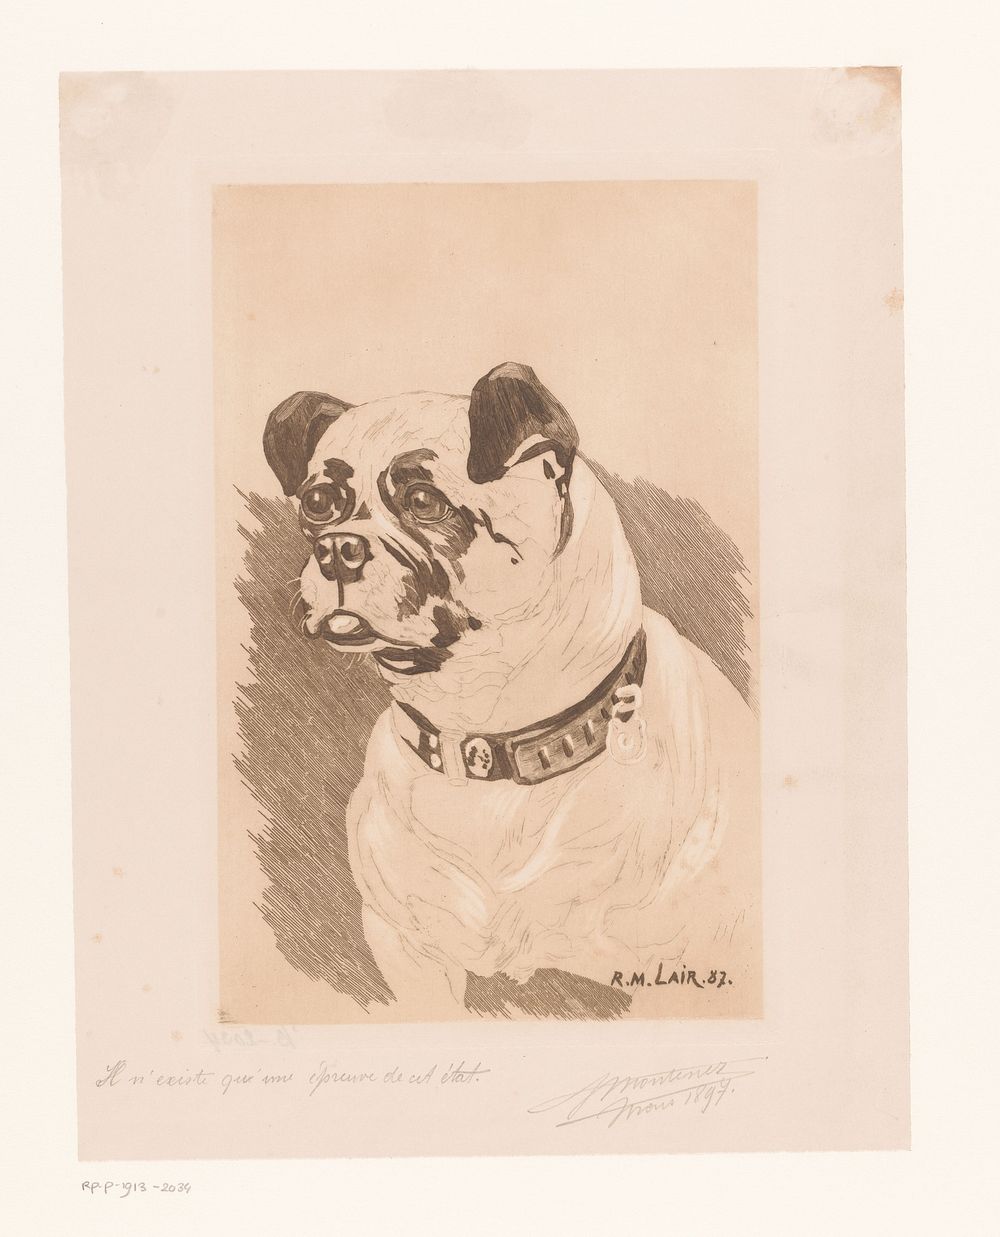 Hond met halsband (1897) by Georges Montenez and R M Lair